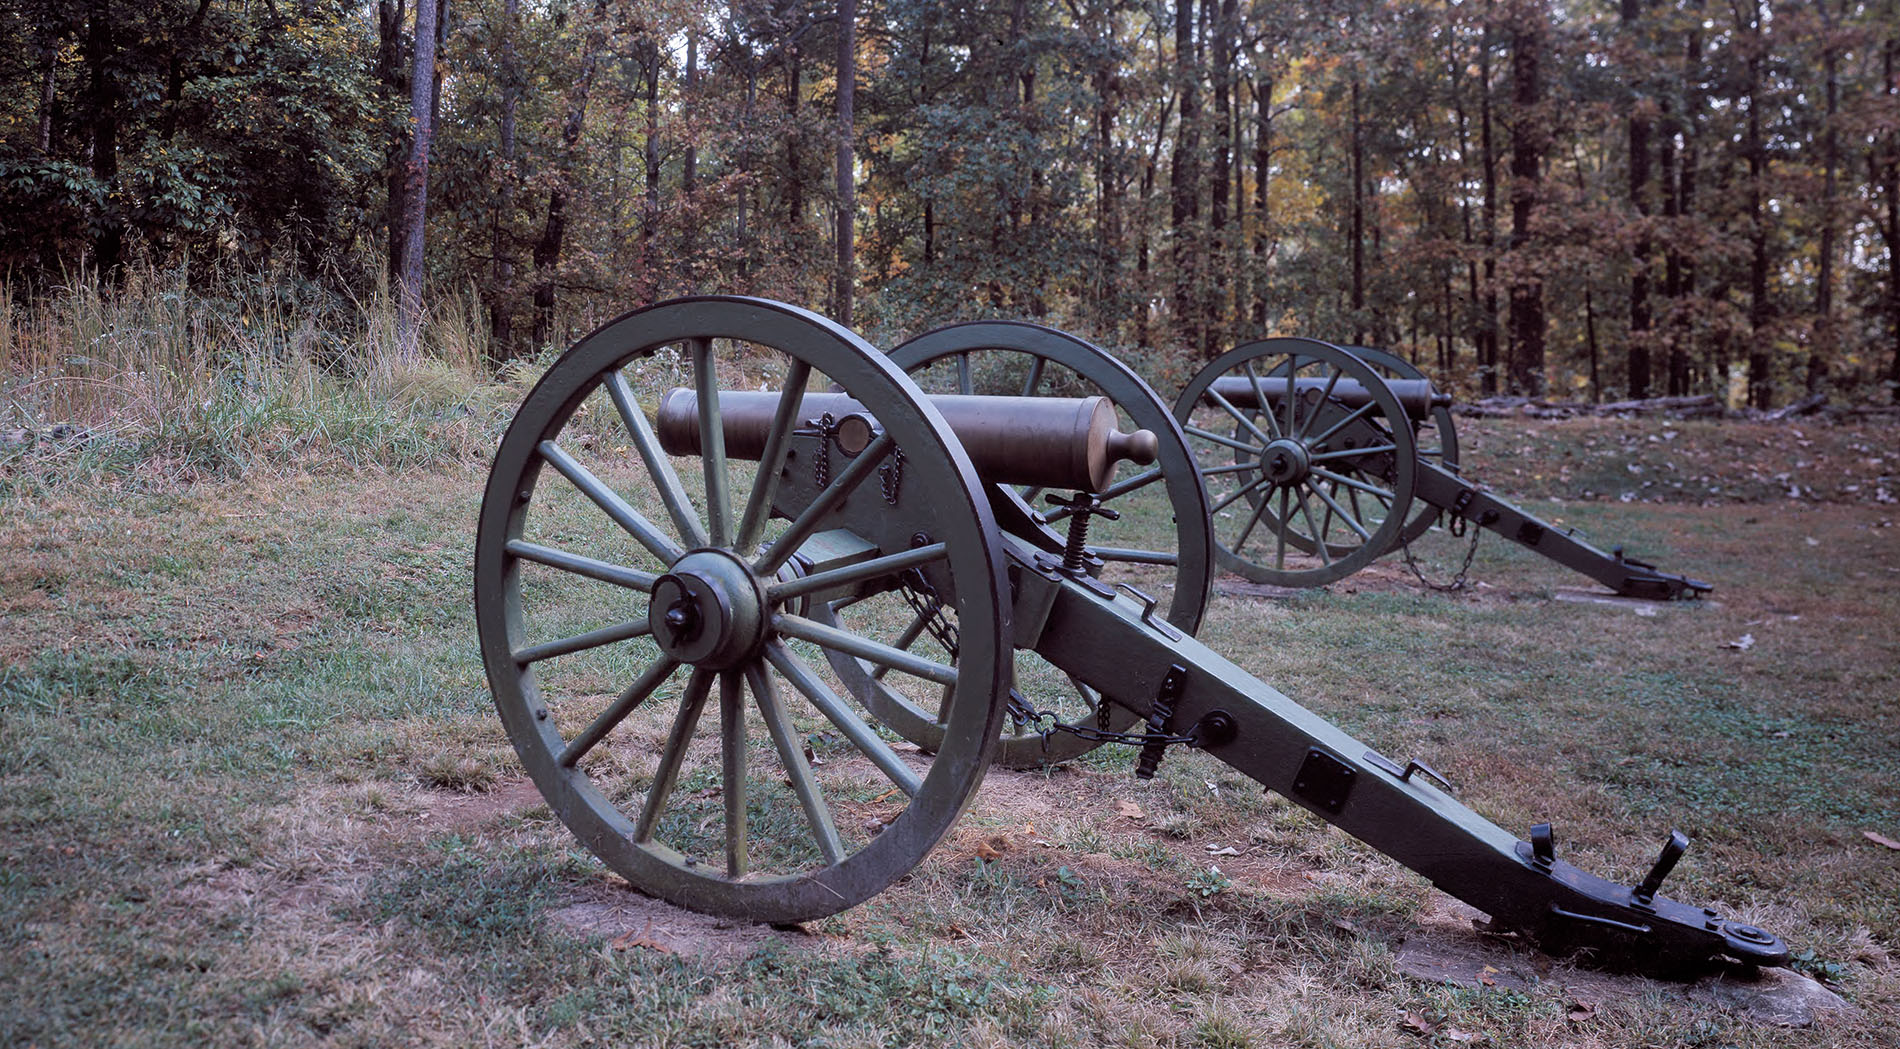 Cannons at Cheatham Hill, Kennesaw Mountain battle site, Georgia